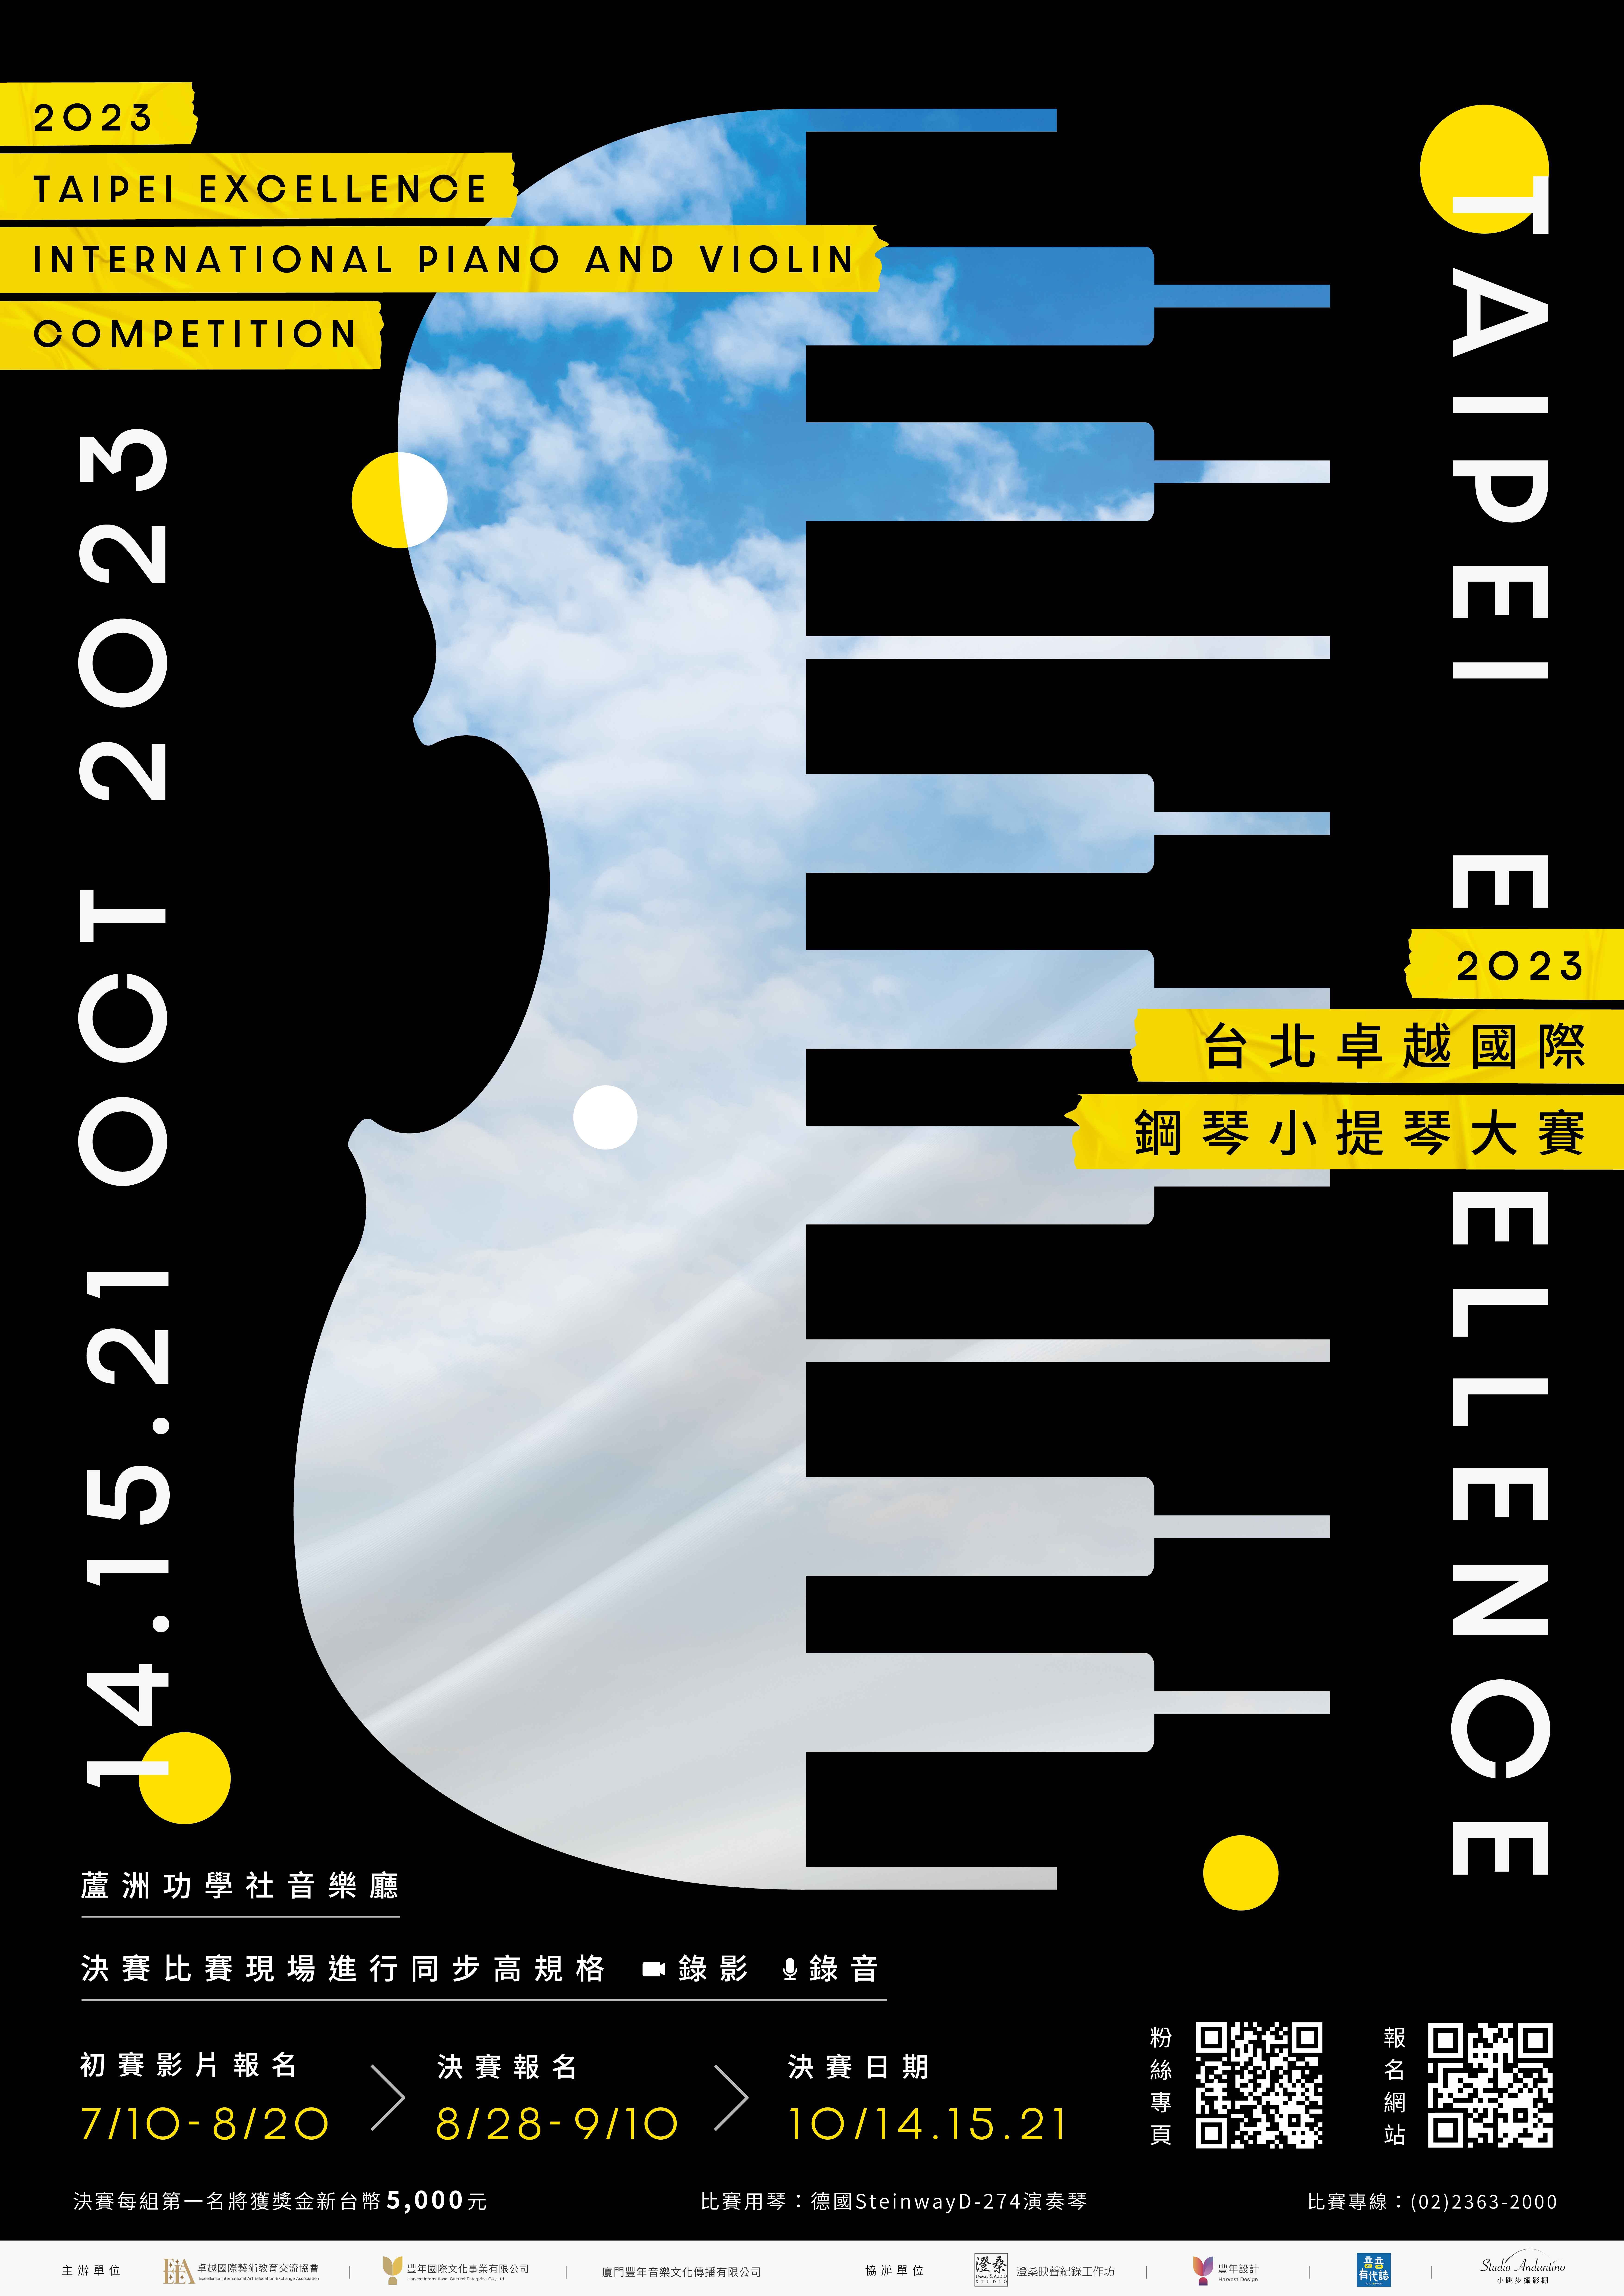 Taipei Excellence International Piano and Violin Competition 2022 (Final Round)_Copy